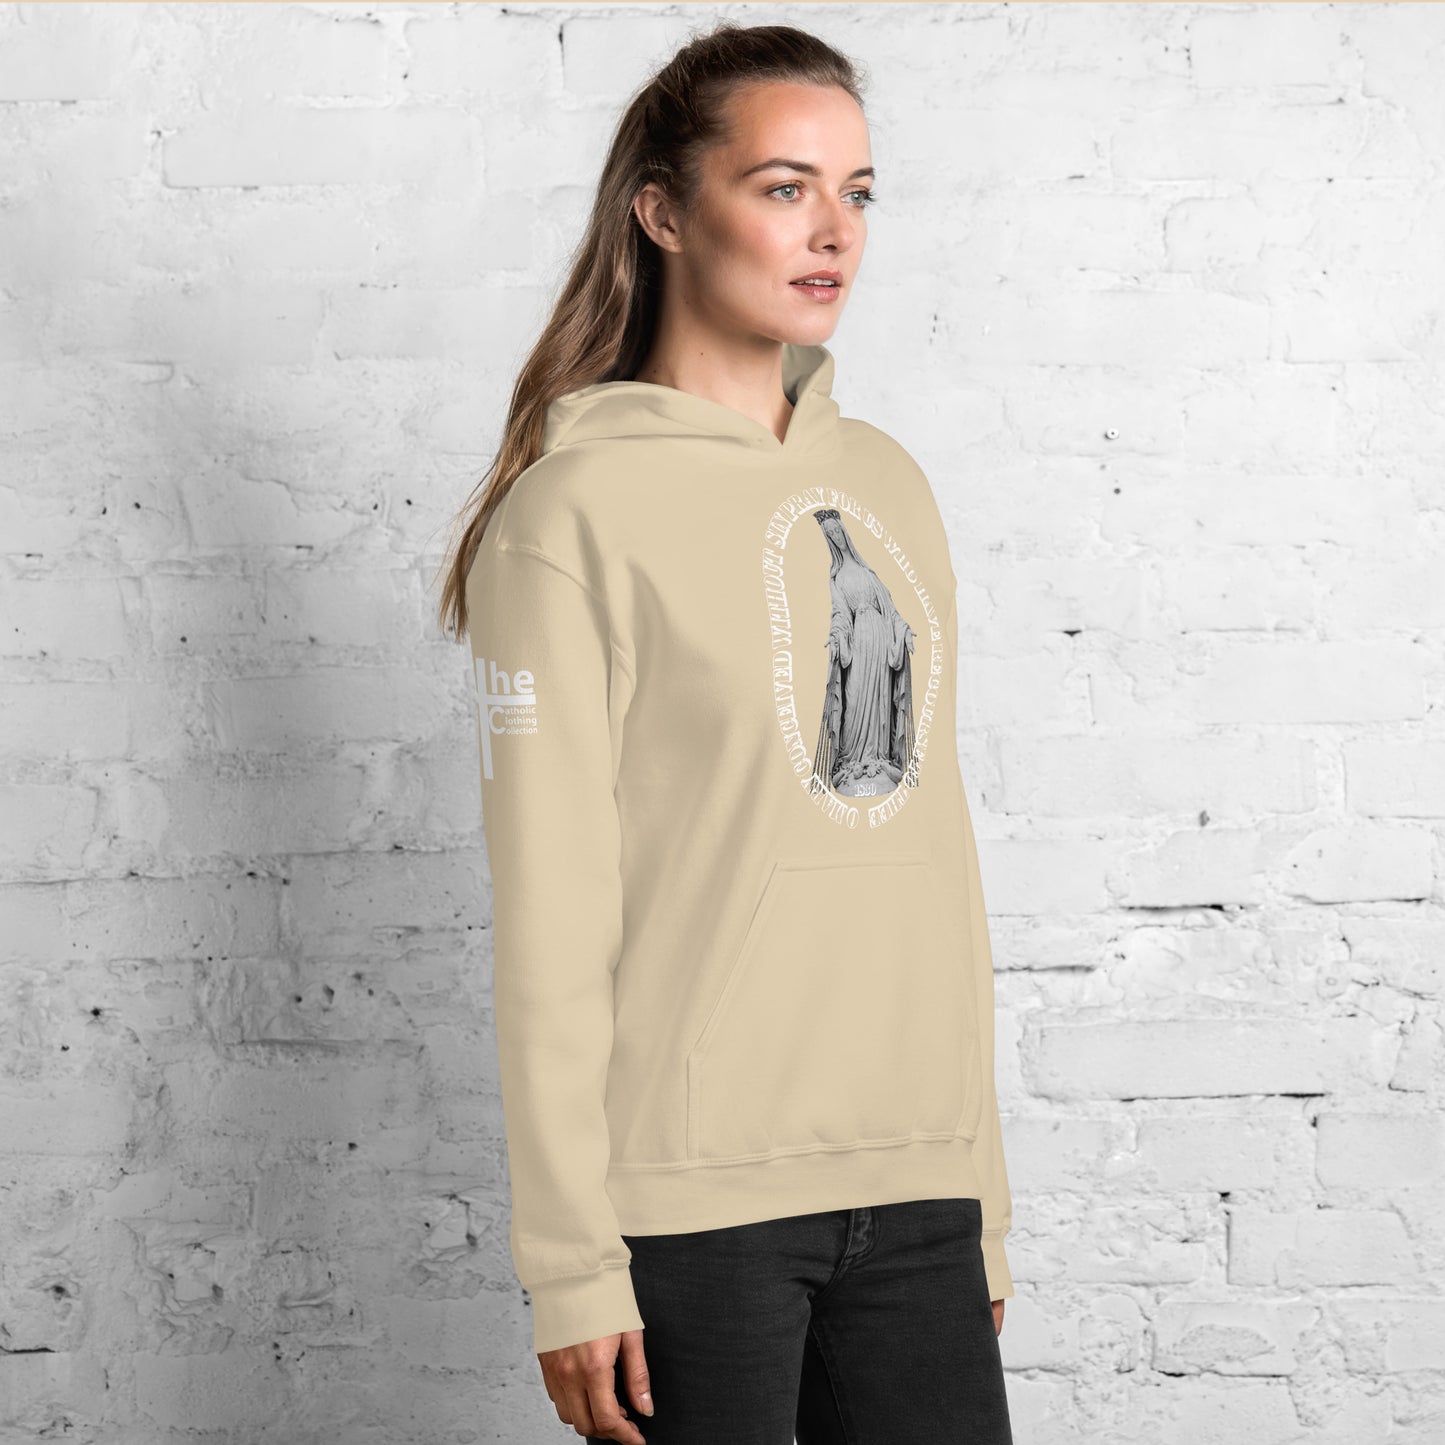 Miraculous Medal (coloured Hearts) Women's Hoodie